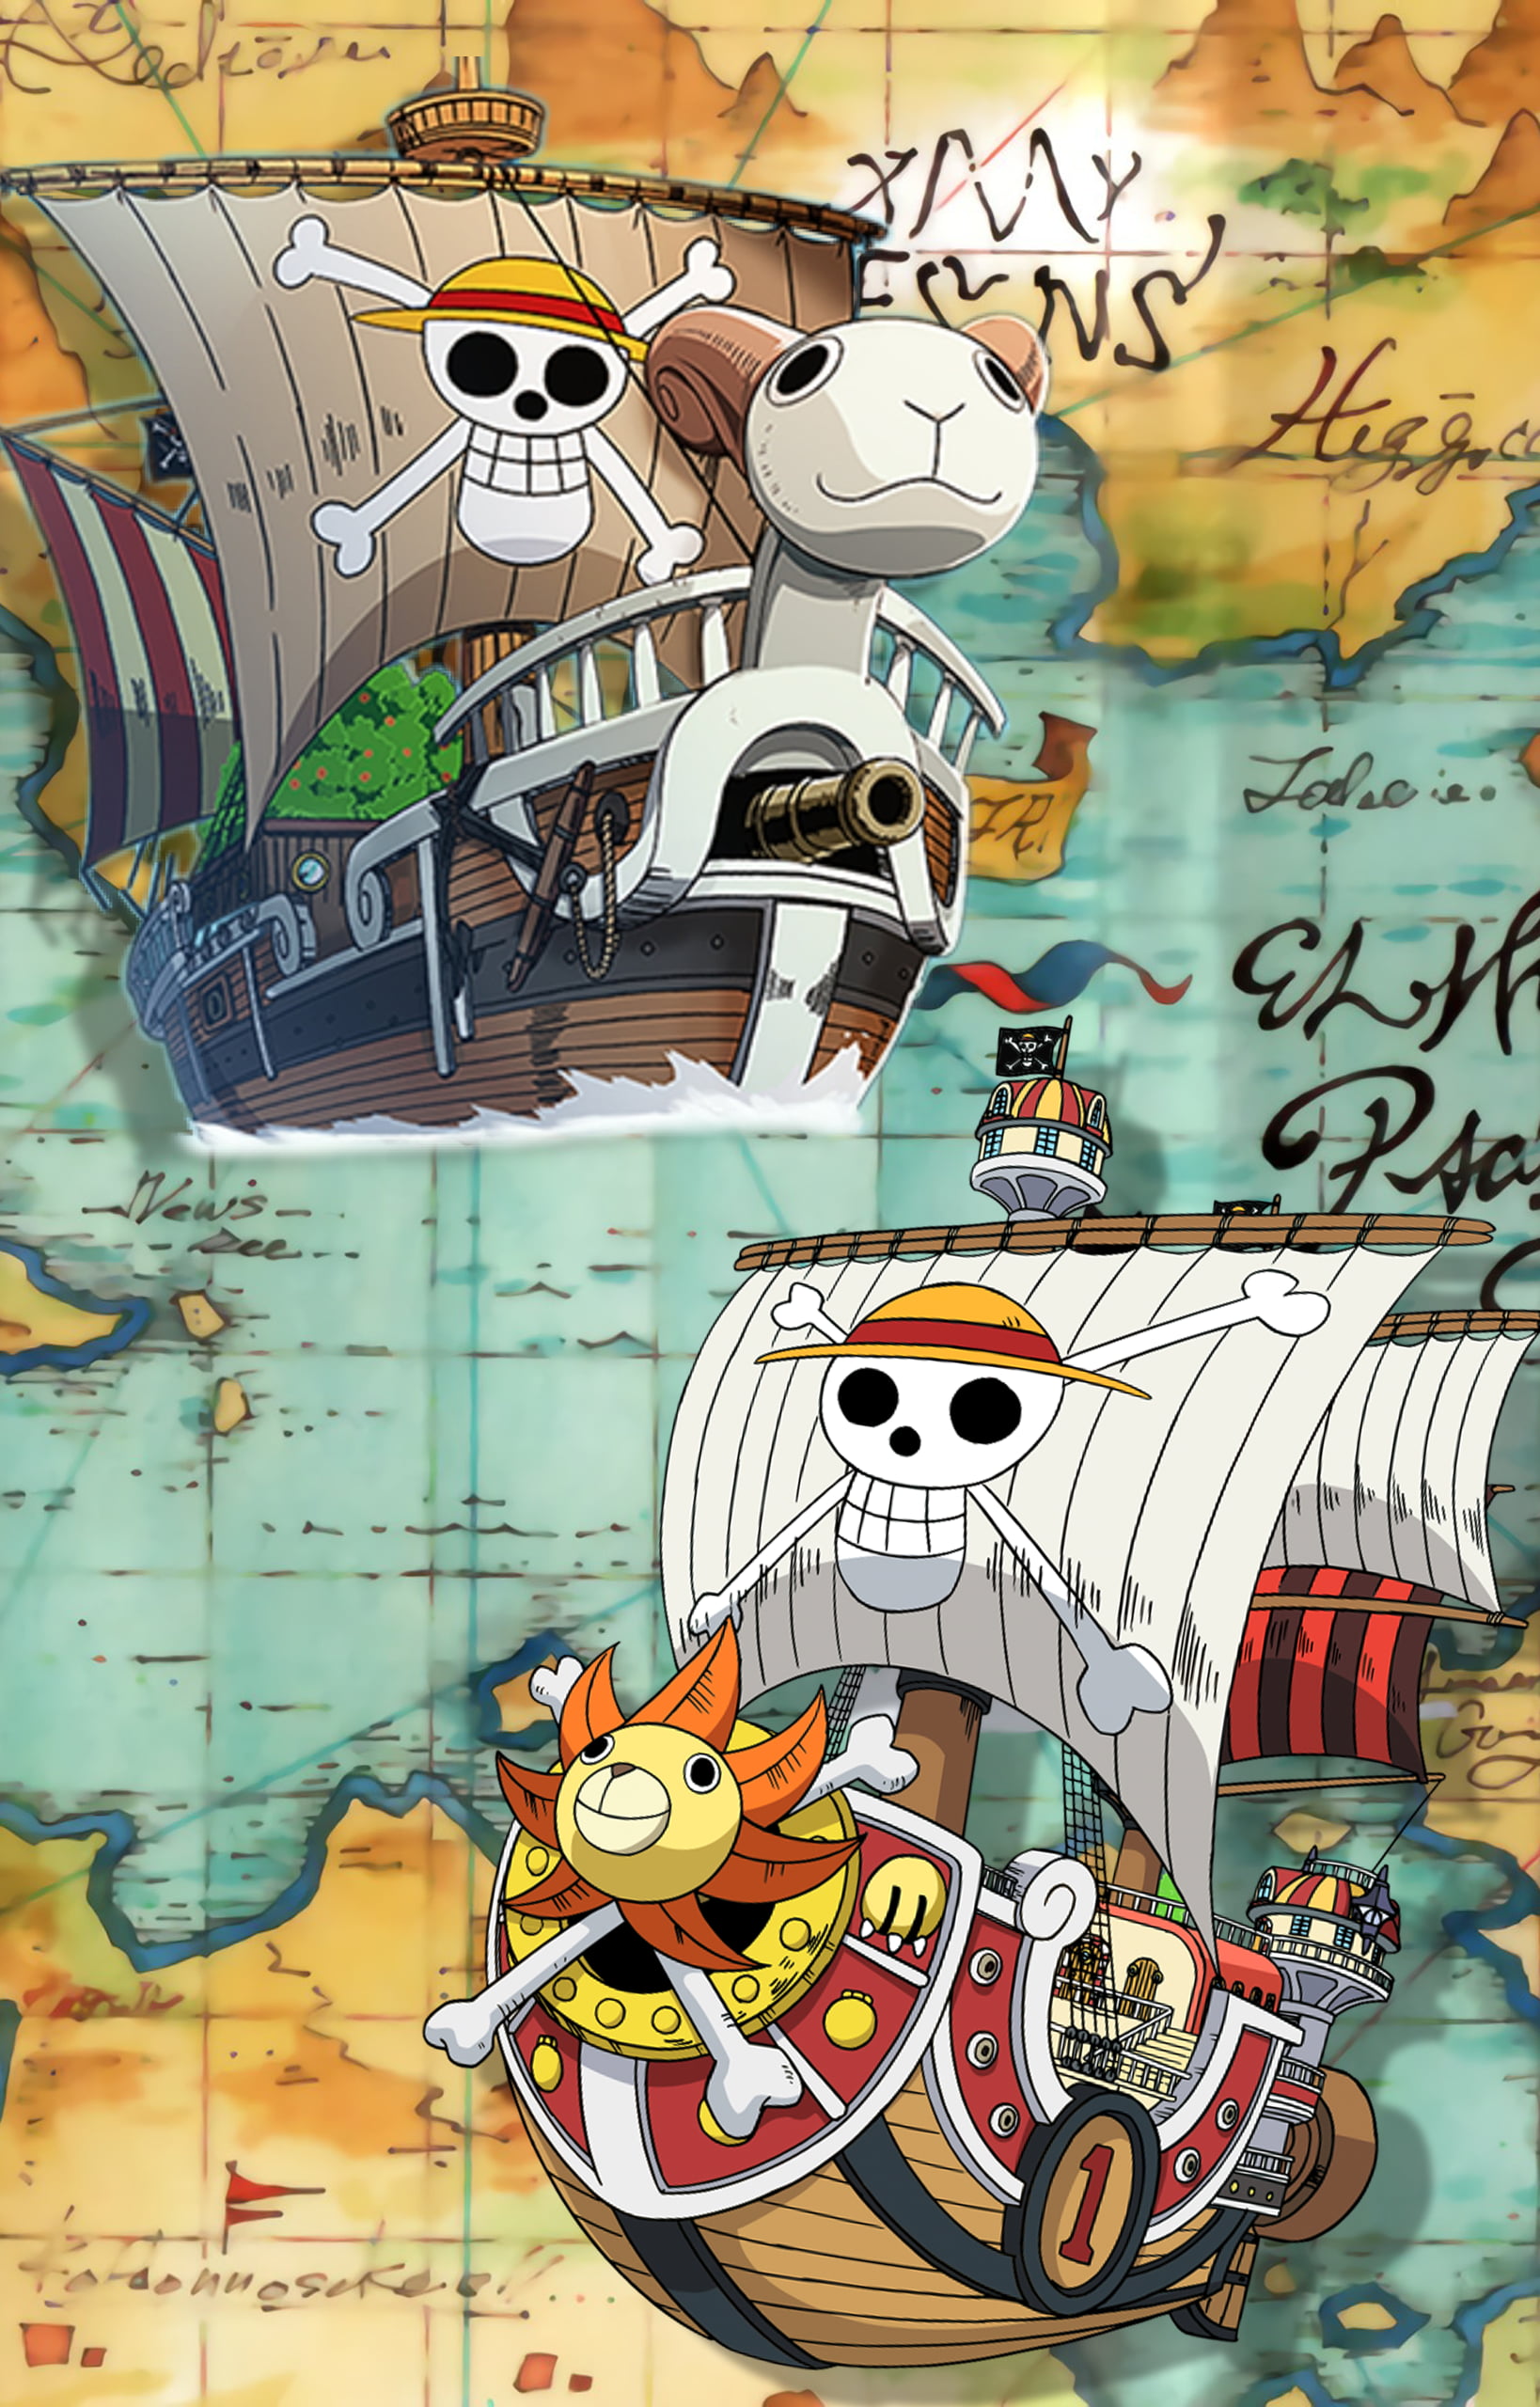 Free download | HD wallpaper: One Piece, Thousand Sunny | Wallpaper Flare